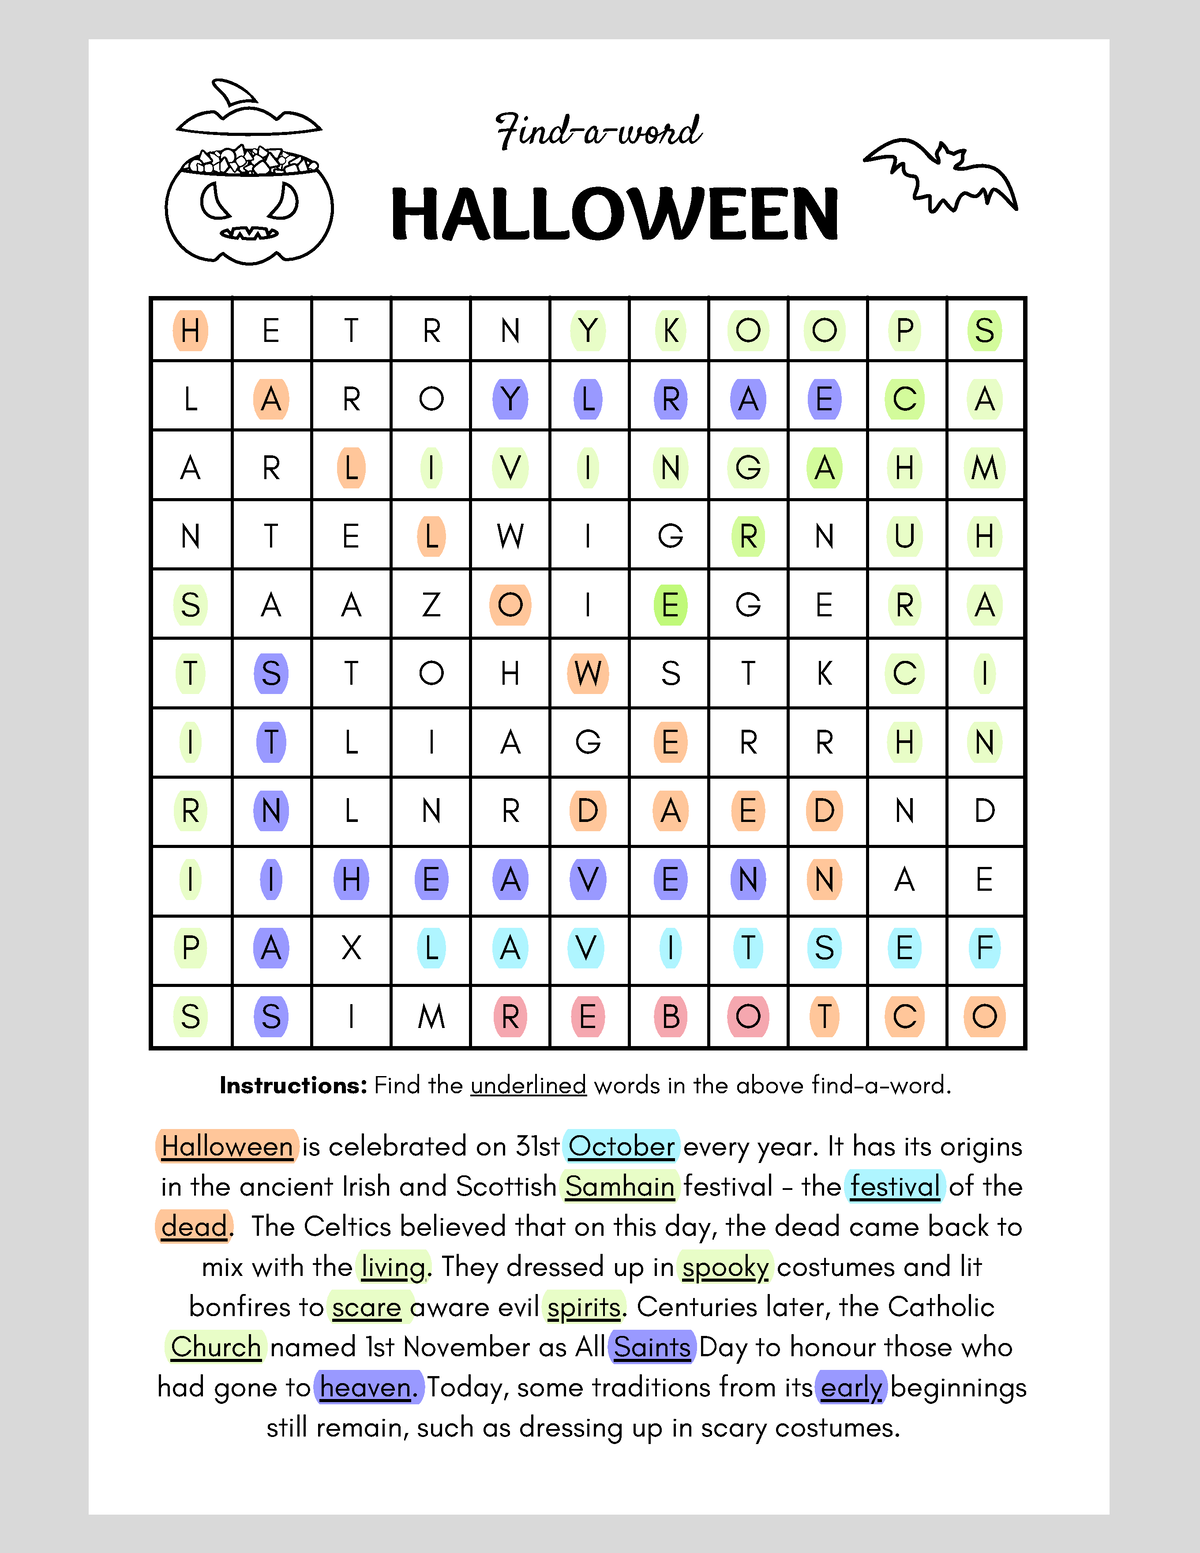 halloween-find-a-word-worksheet-halloween-is-celebrated-on-31st-october-every-year-it-has-its